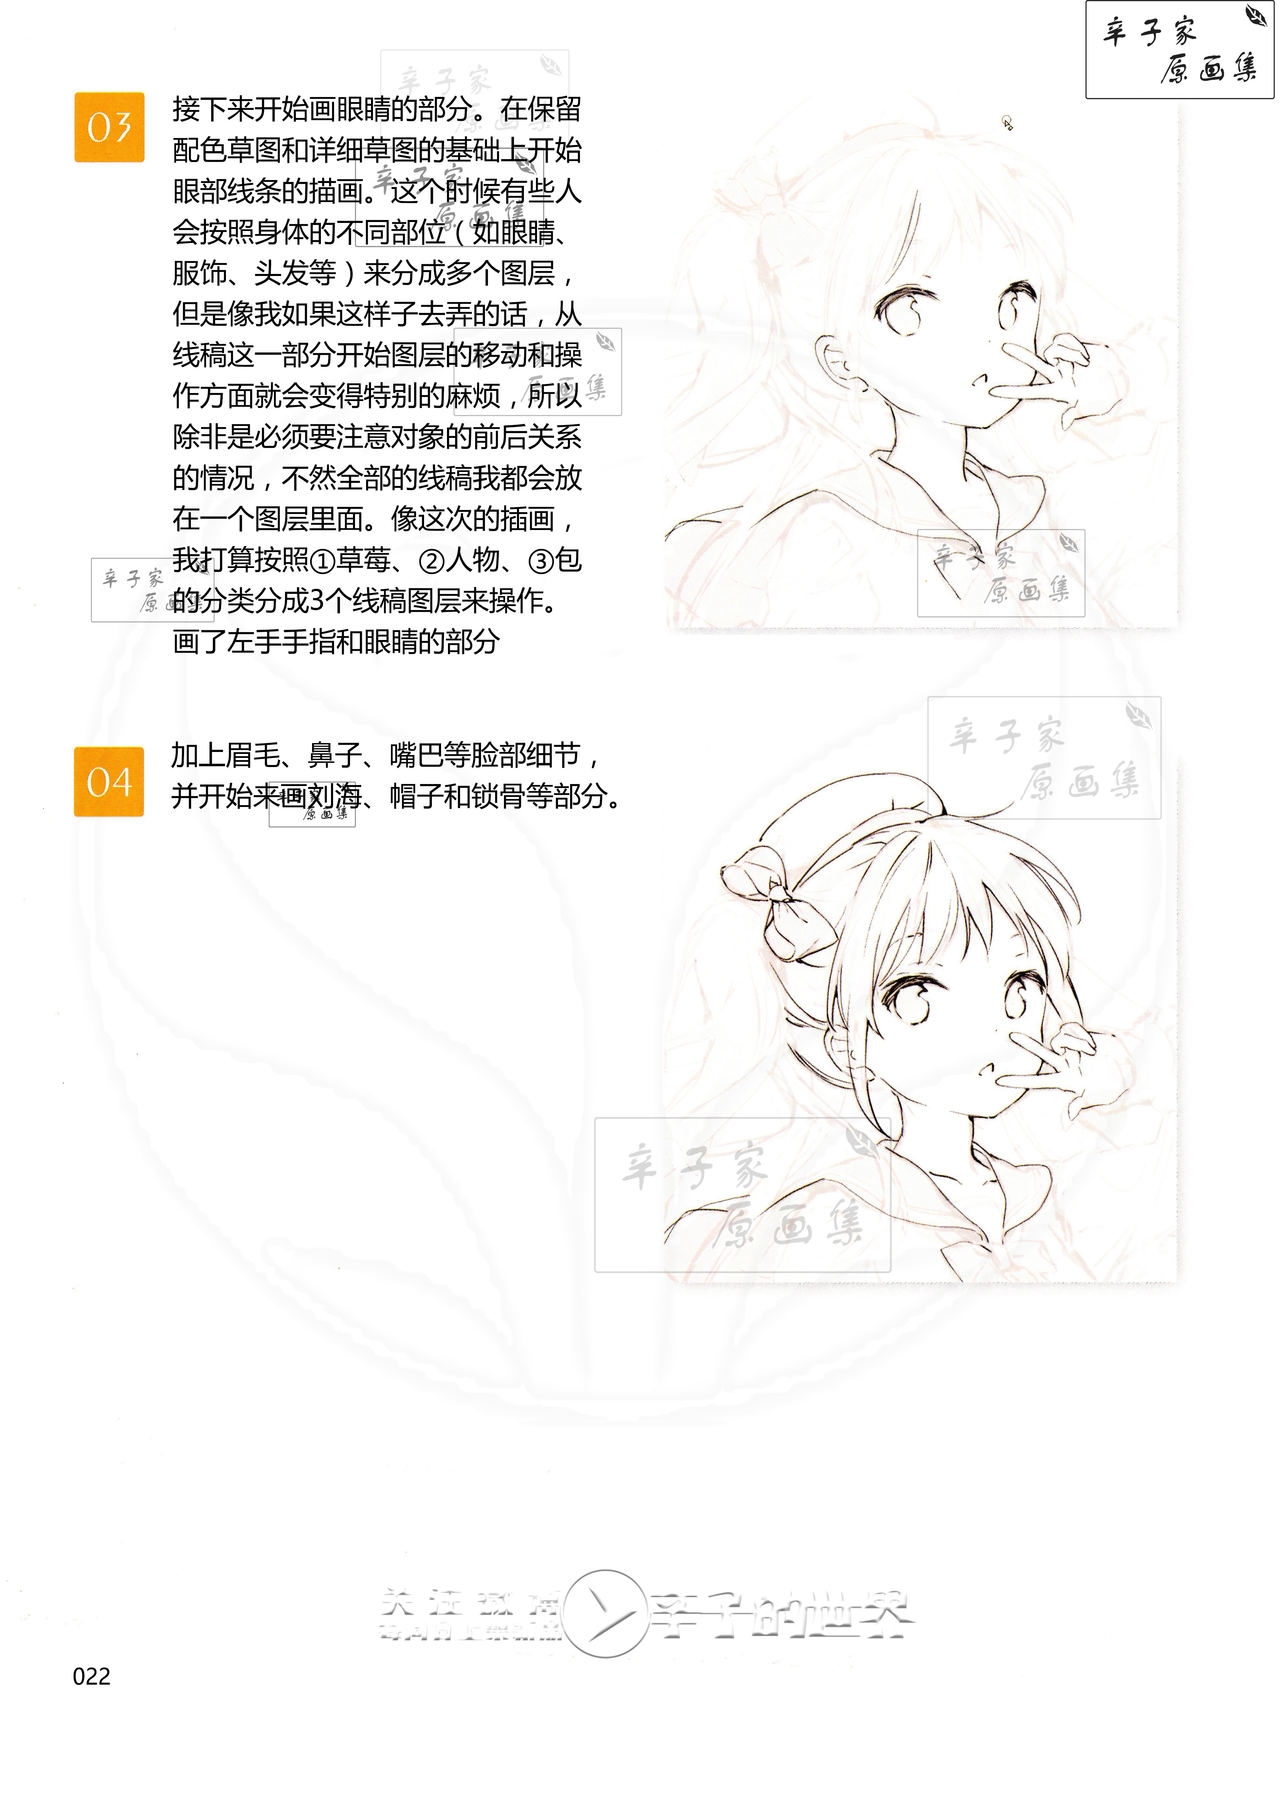 [Anmi] Lets Make ★ Character CG illustration techniques vol.9 [Chinese] 21